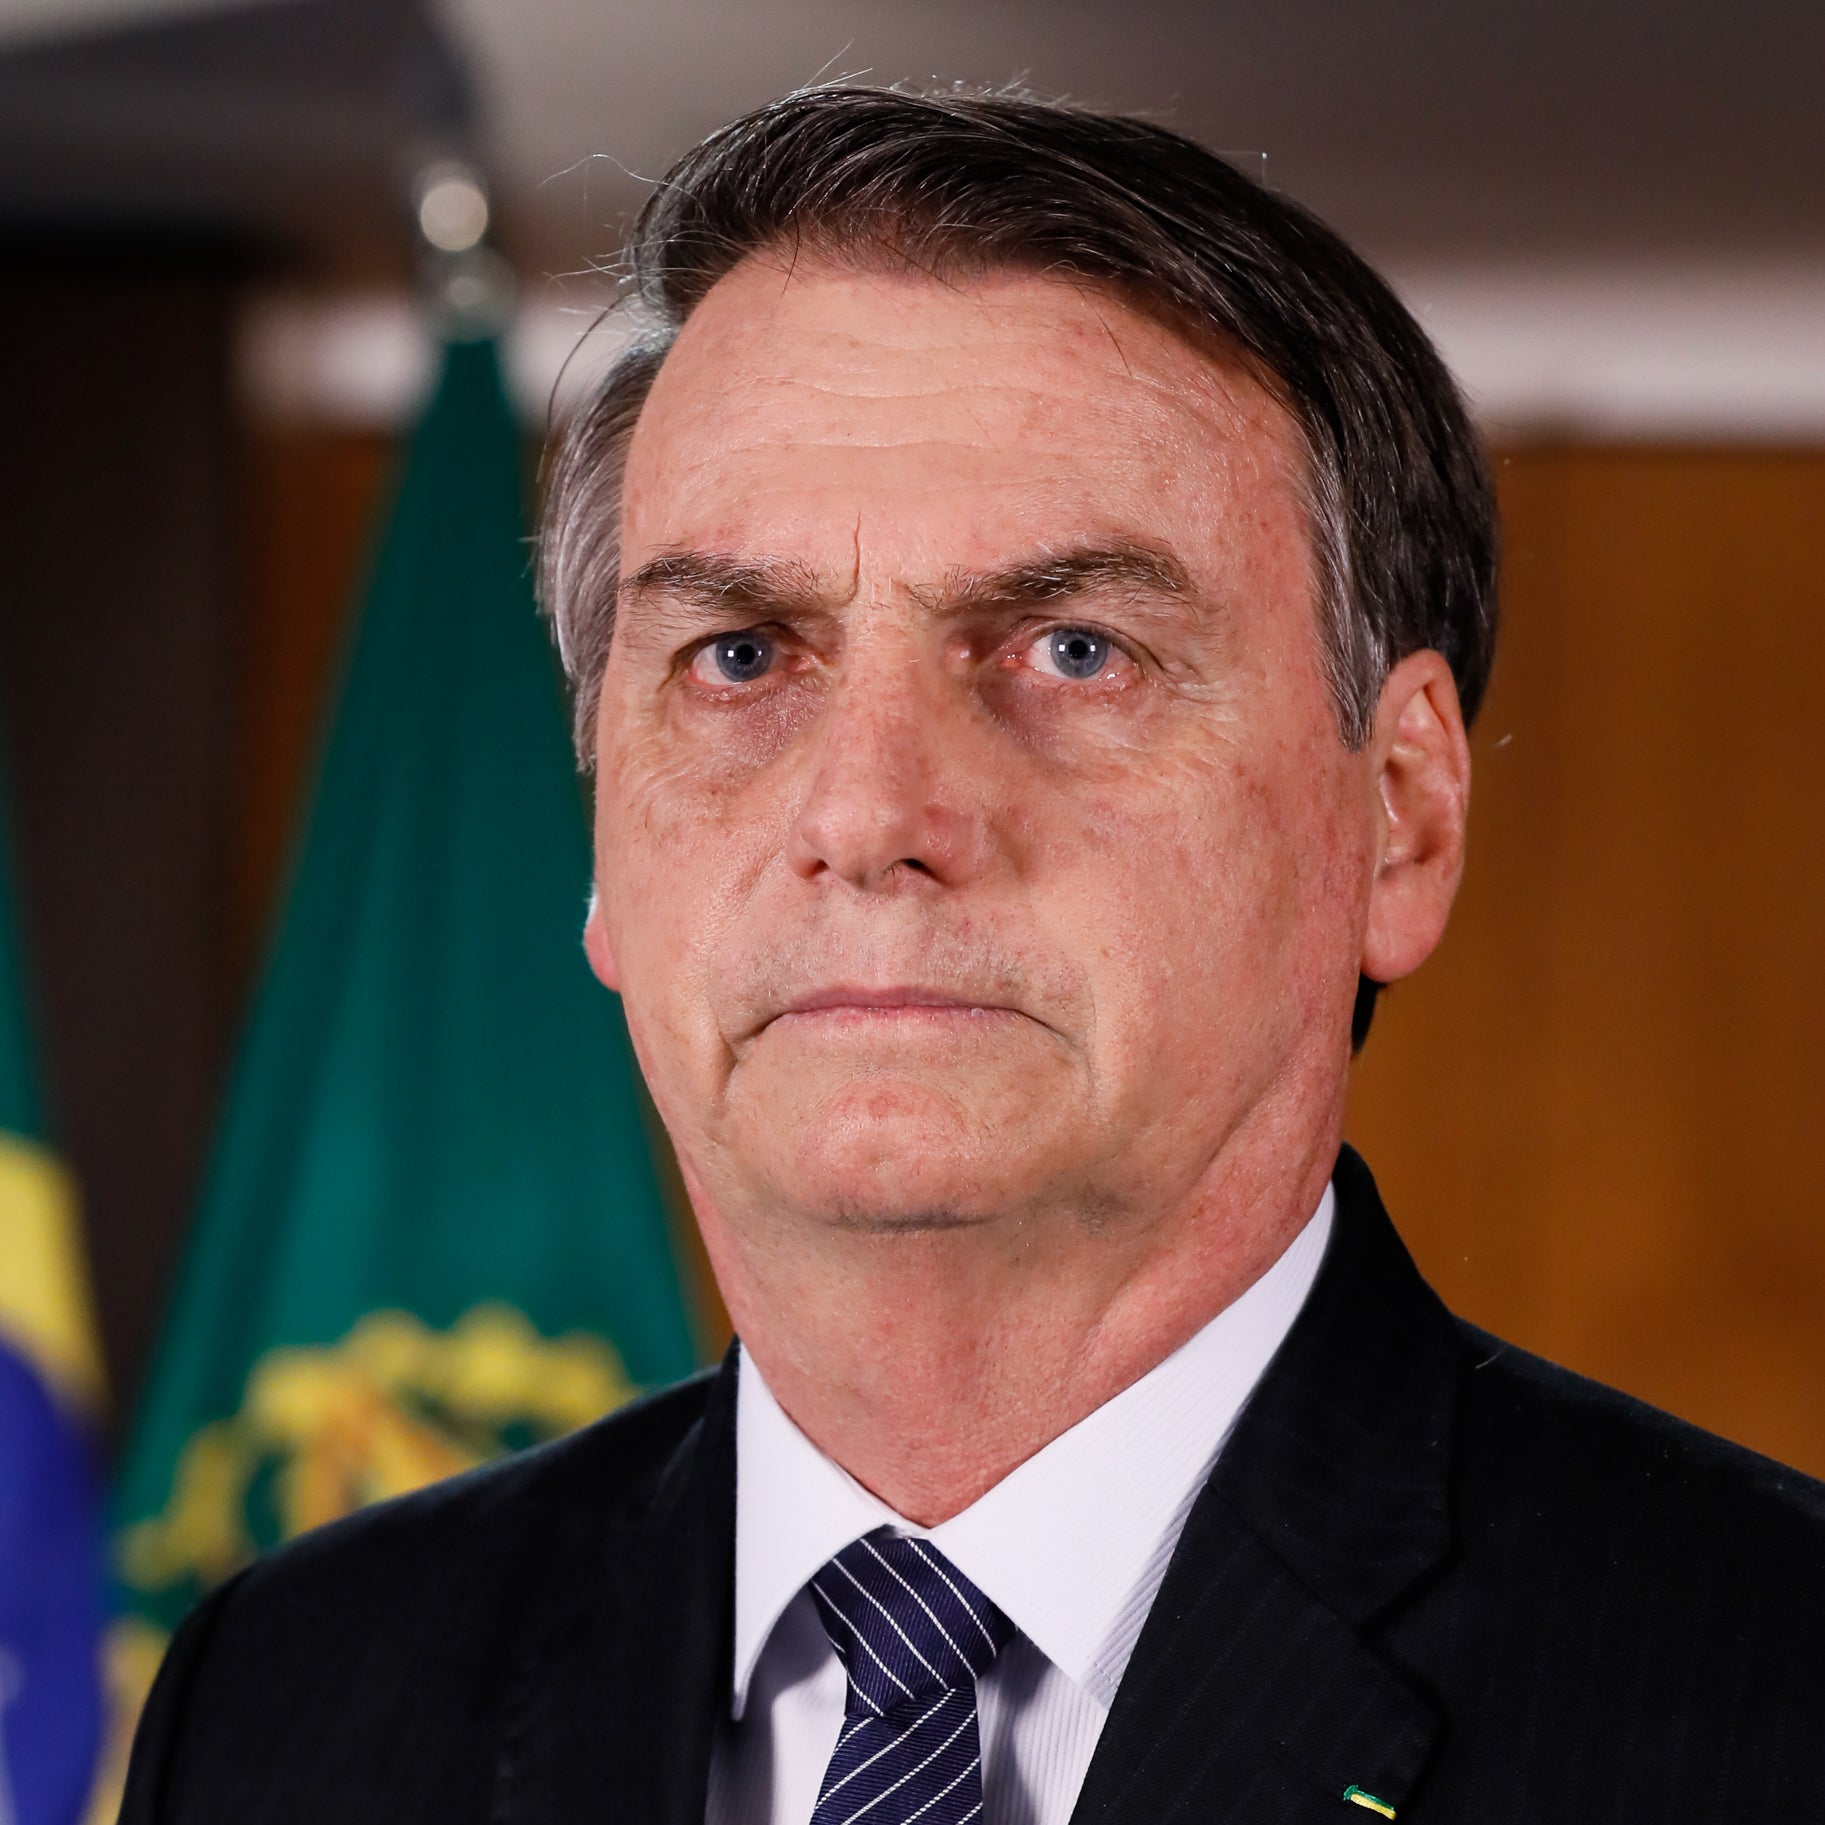 Bolsonaro stares into the camera with a kind of serious-but-dog expression.